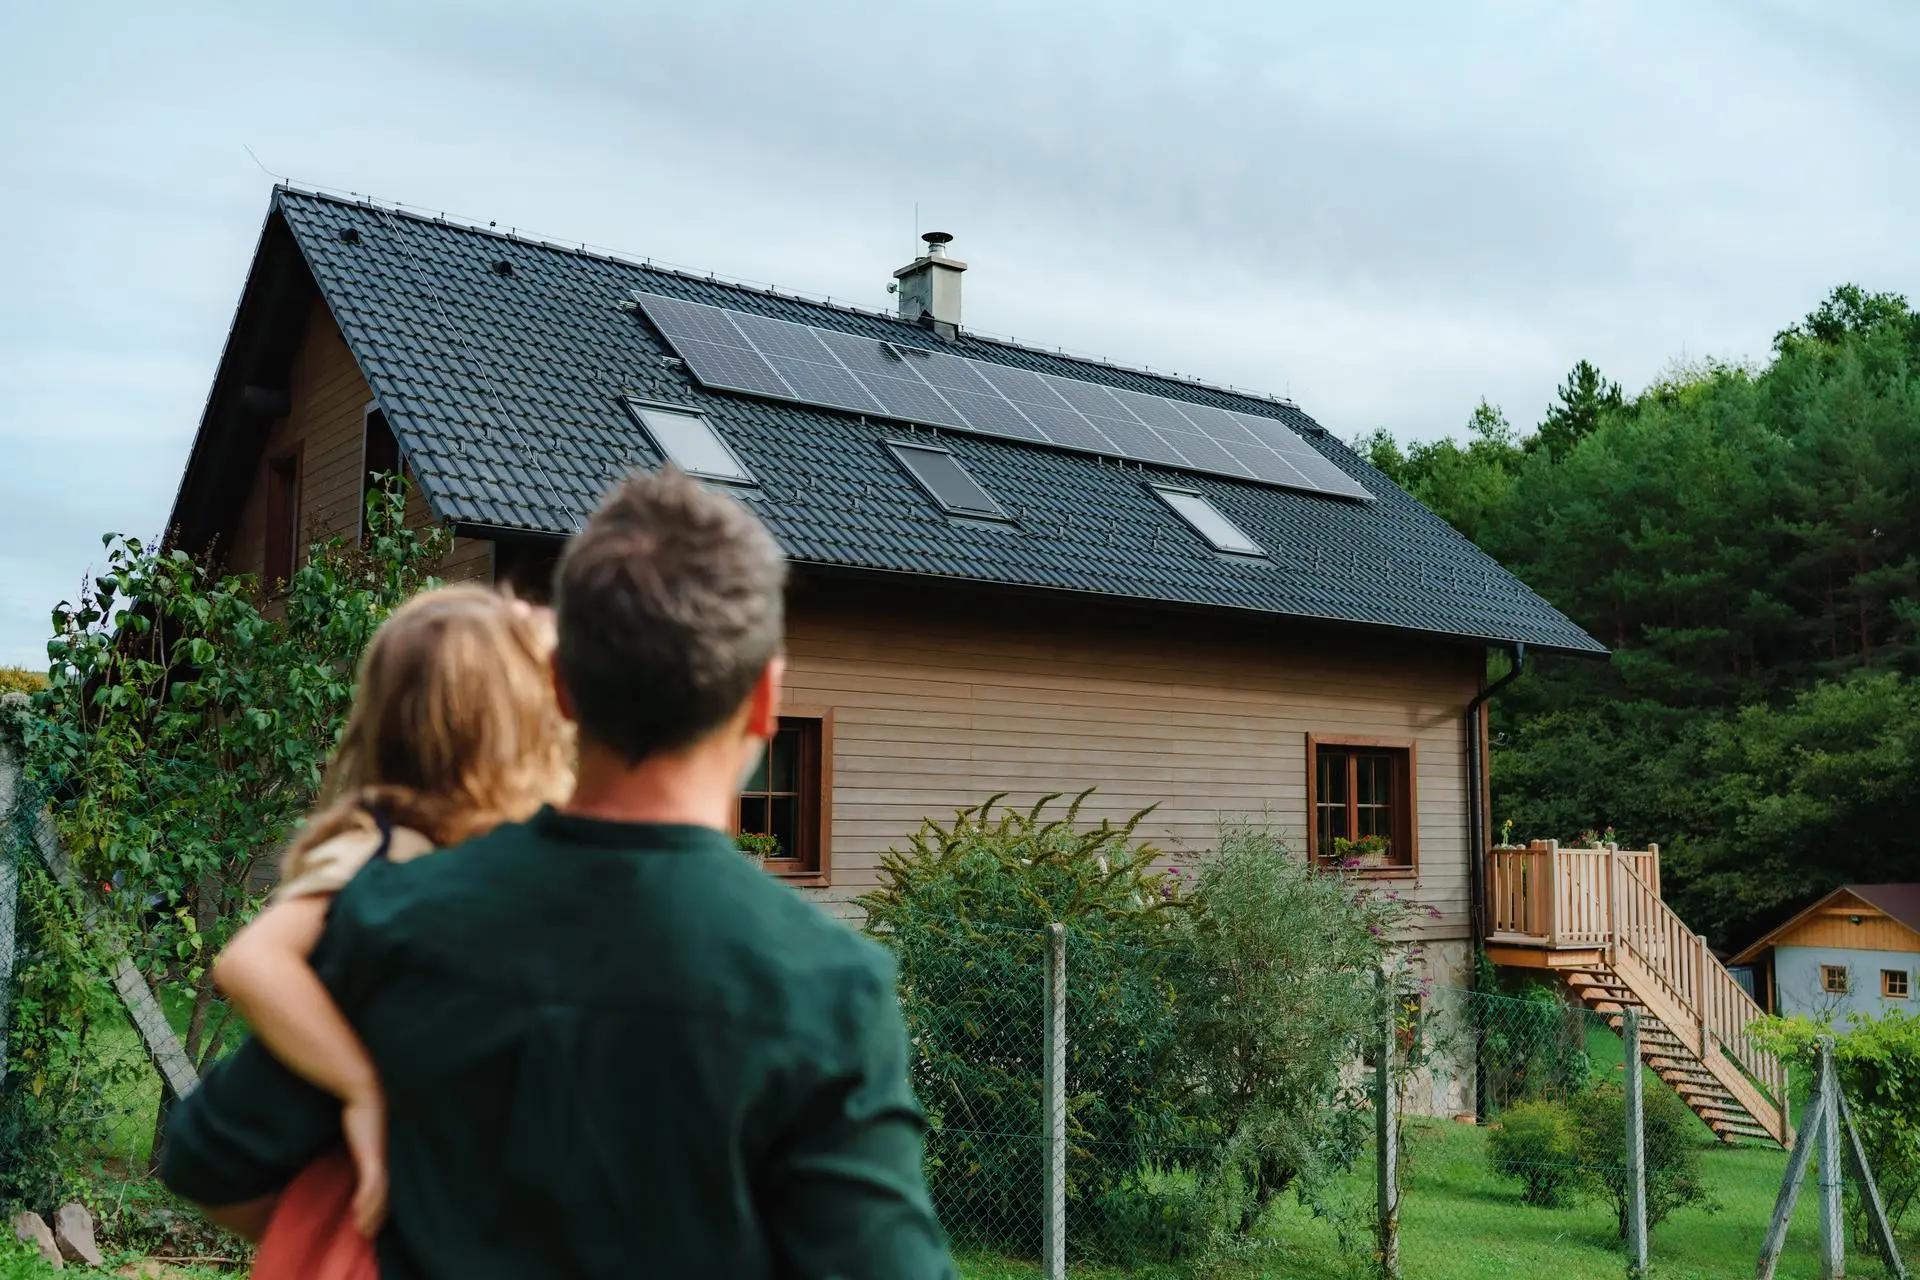 7 Ways to Dial Down Your Energy Bills During Record-High Summer Heat house home family solar energy roof outdoors summer architecture nature wood electricity alternative solar building people window grass sky technology